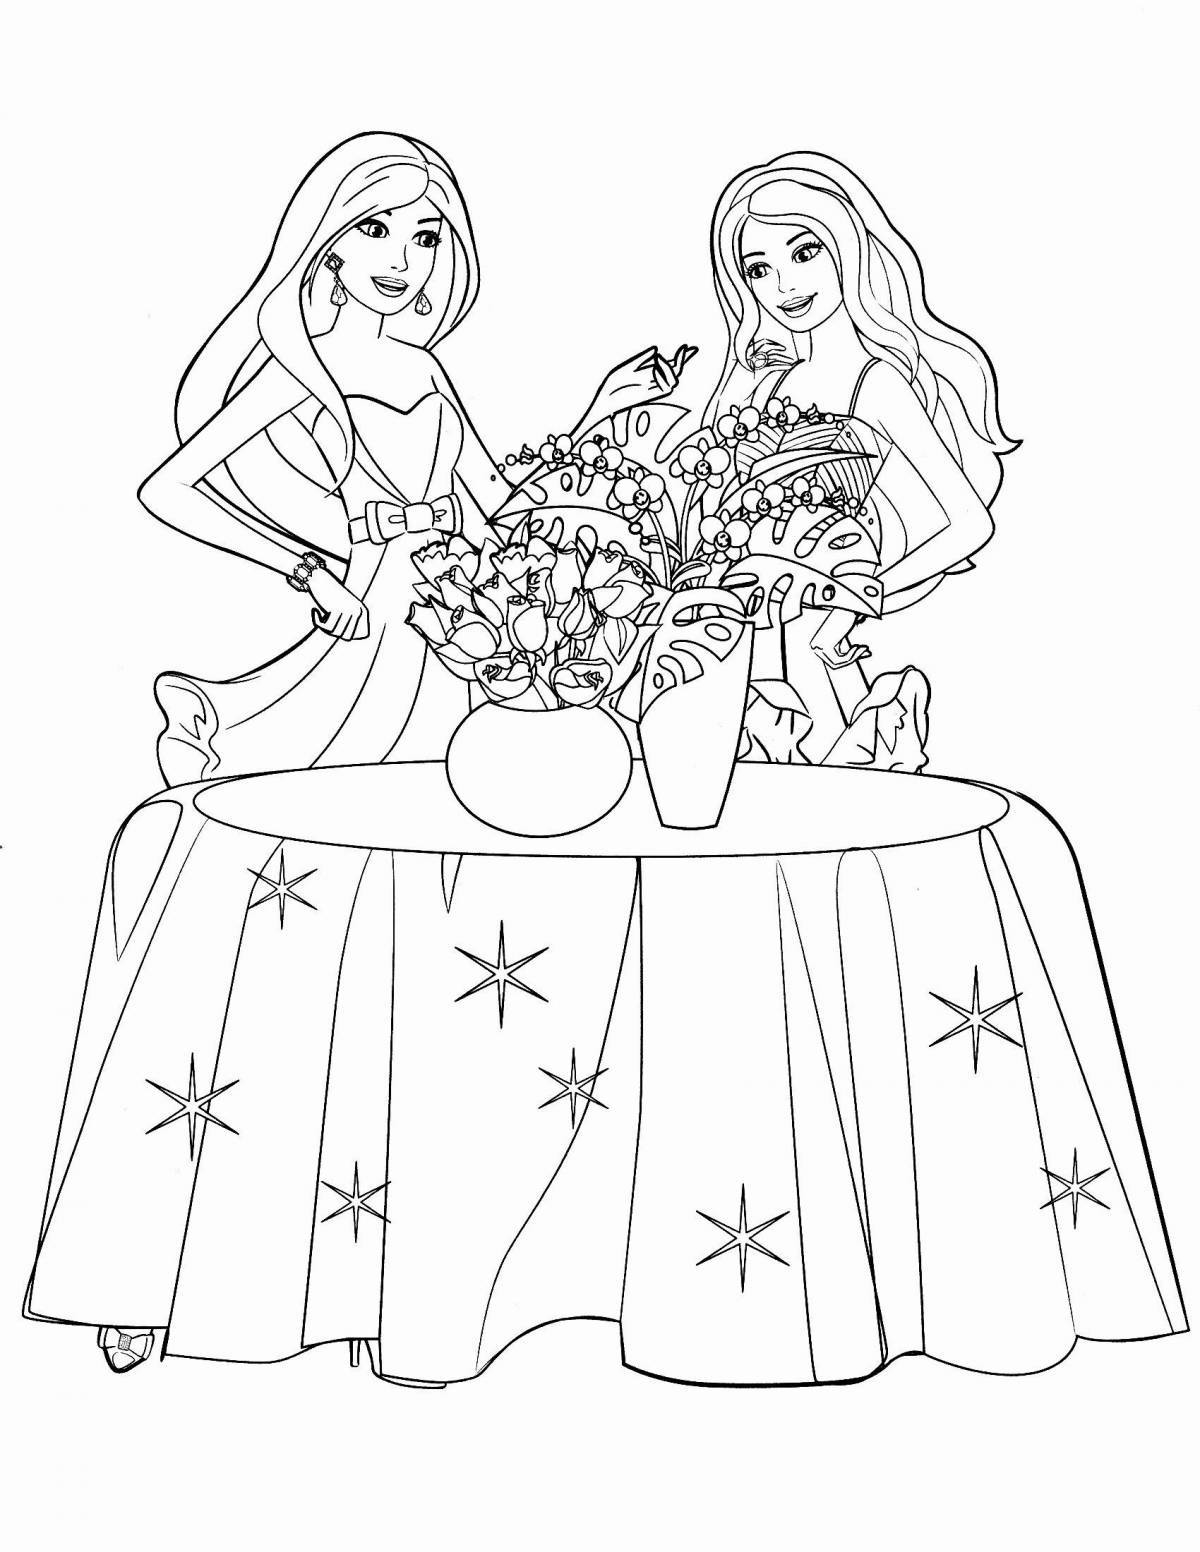 Playful barbie coloring book for kids